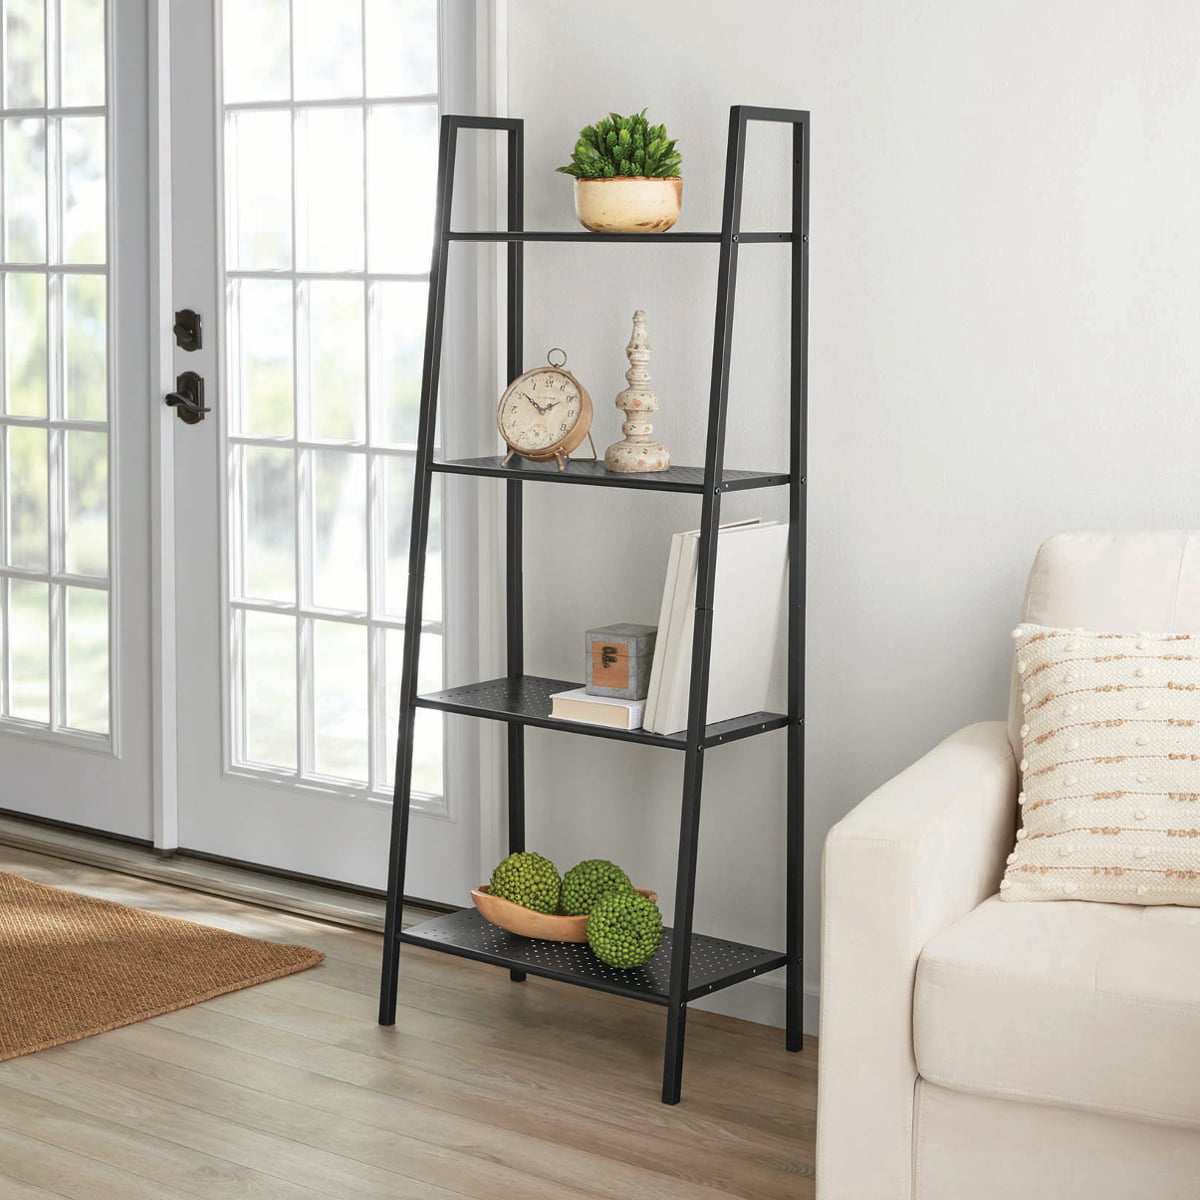 Plant Flower Display Stand Wood Look Storage Rack Bookshelf with Metal Frame Ideal for Bedroom Living Room Balcony Office White, 1 Tangkula 5-Tier Ladder Shelf Bookcase Against The Wall